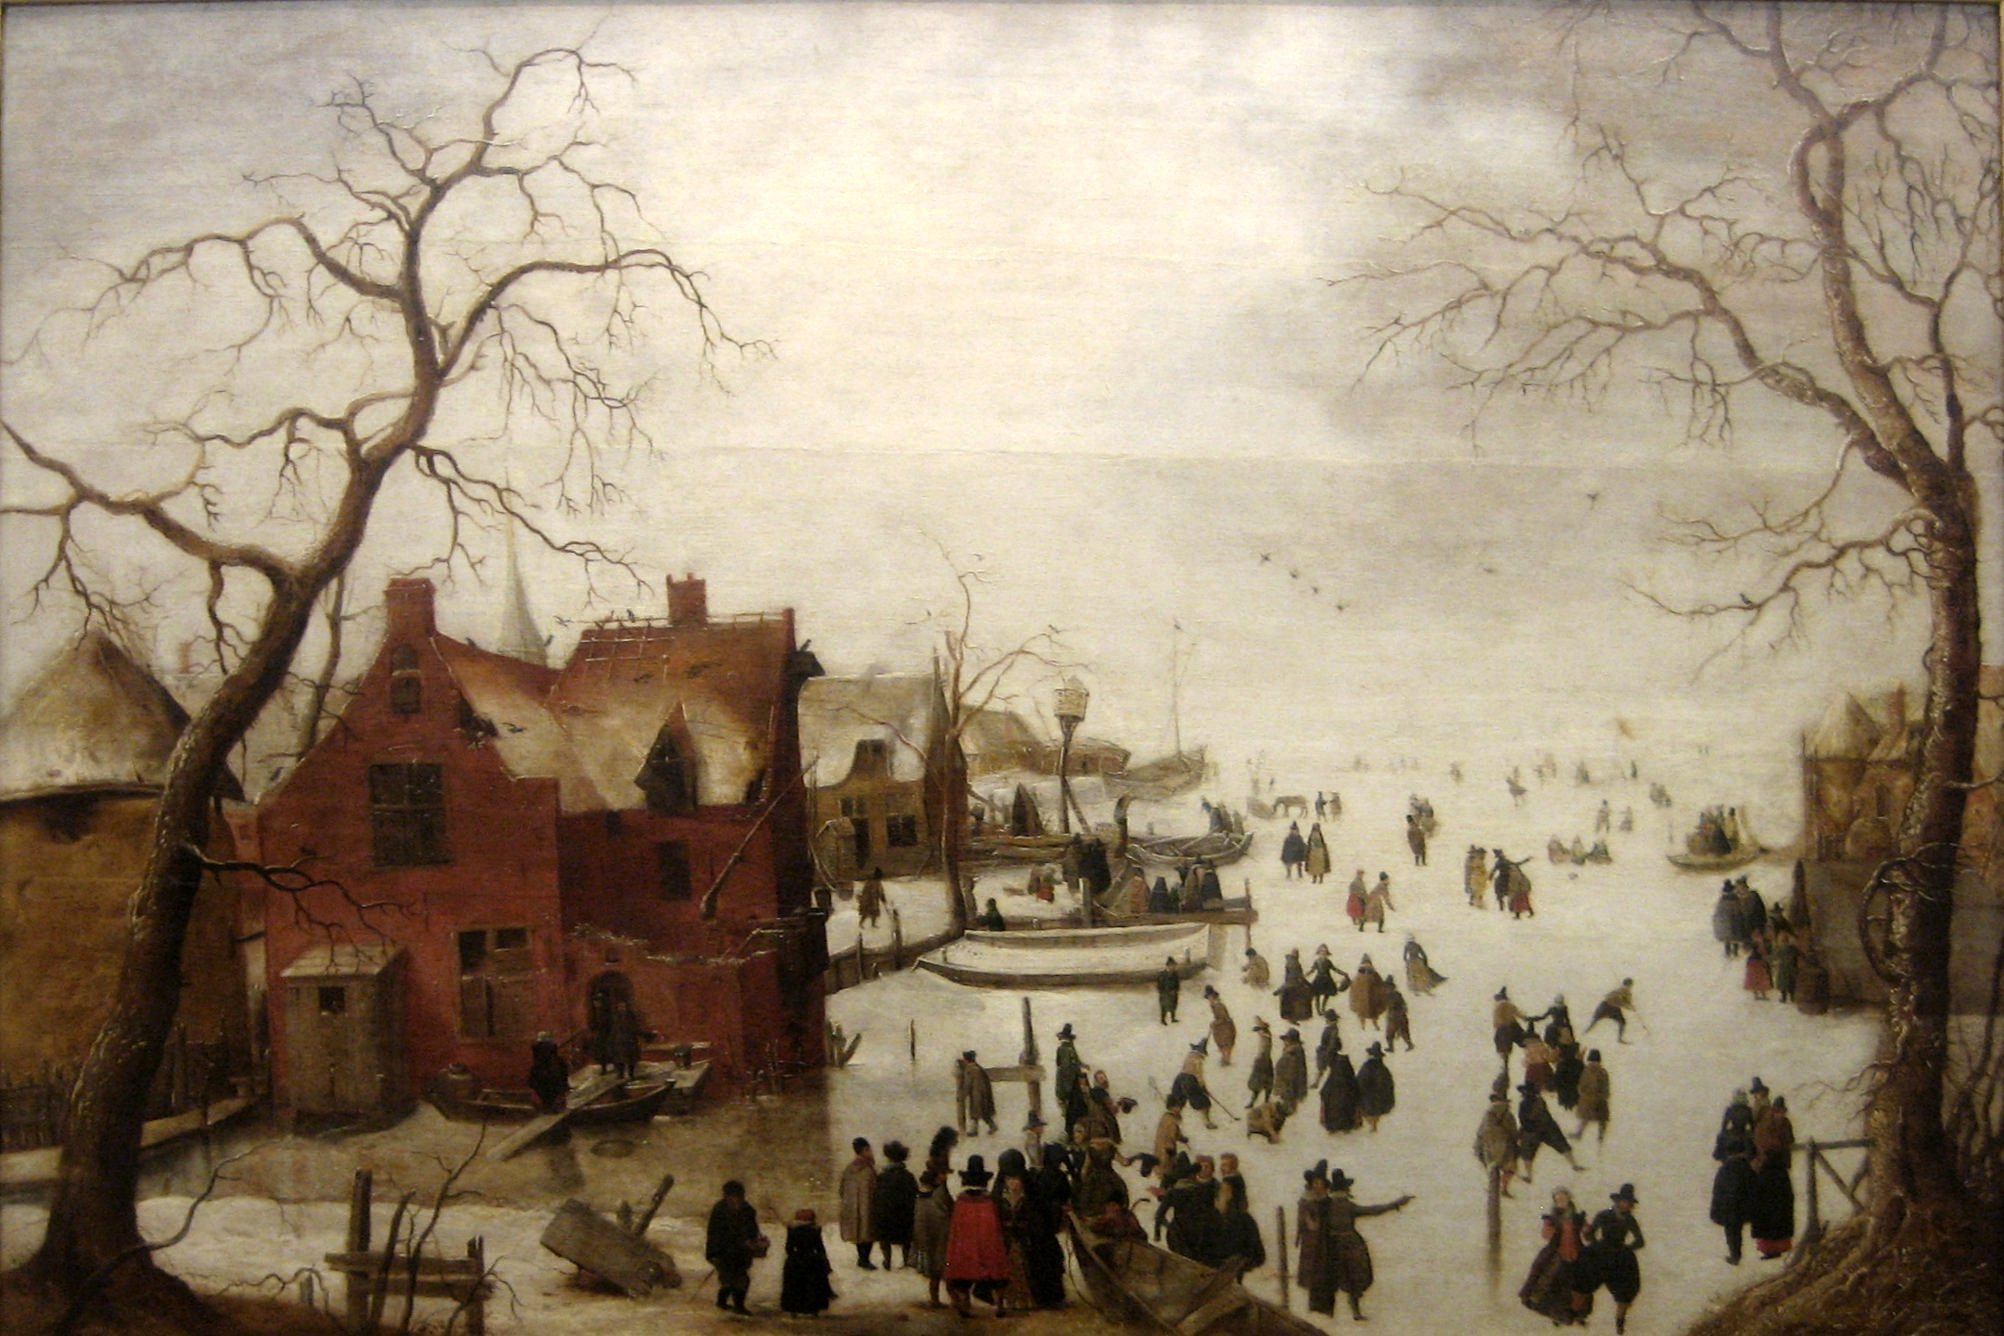 An oil painting of a village, with skaters on an ice covered pond and people walking under bare trees. While the landscape is baren, the painting feels crowded.